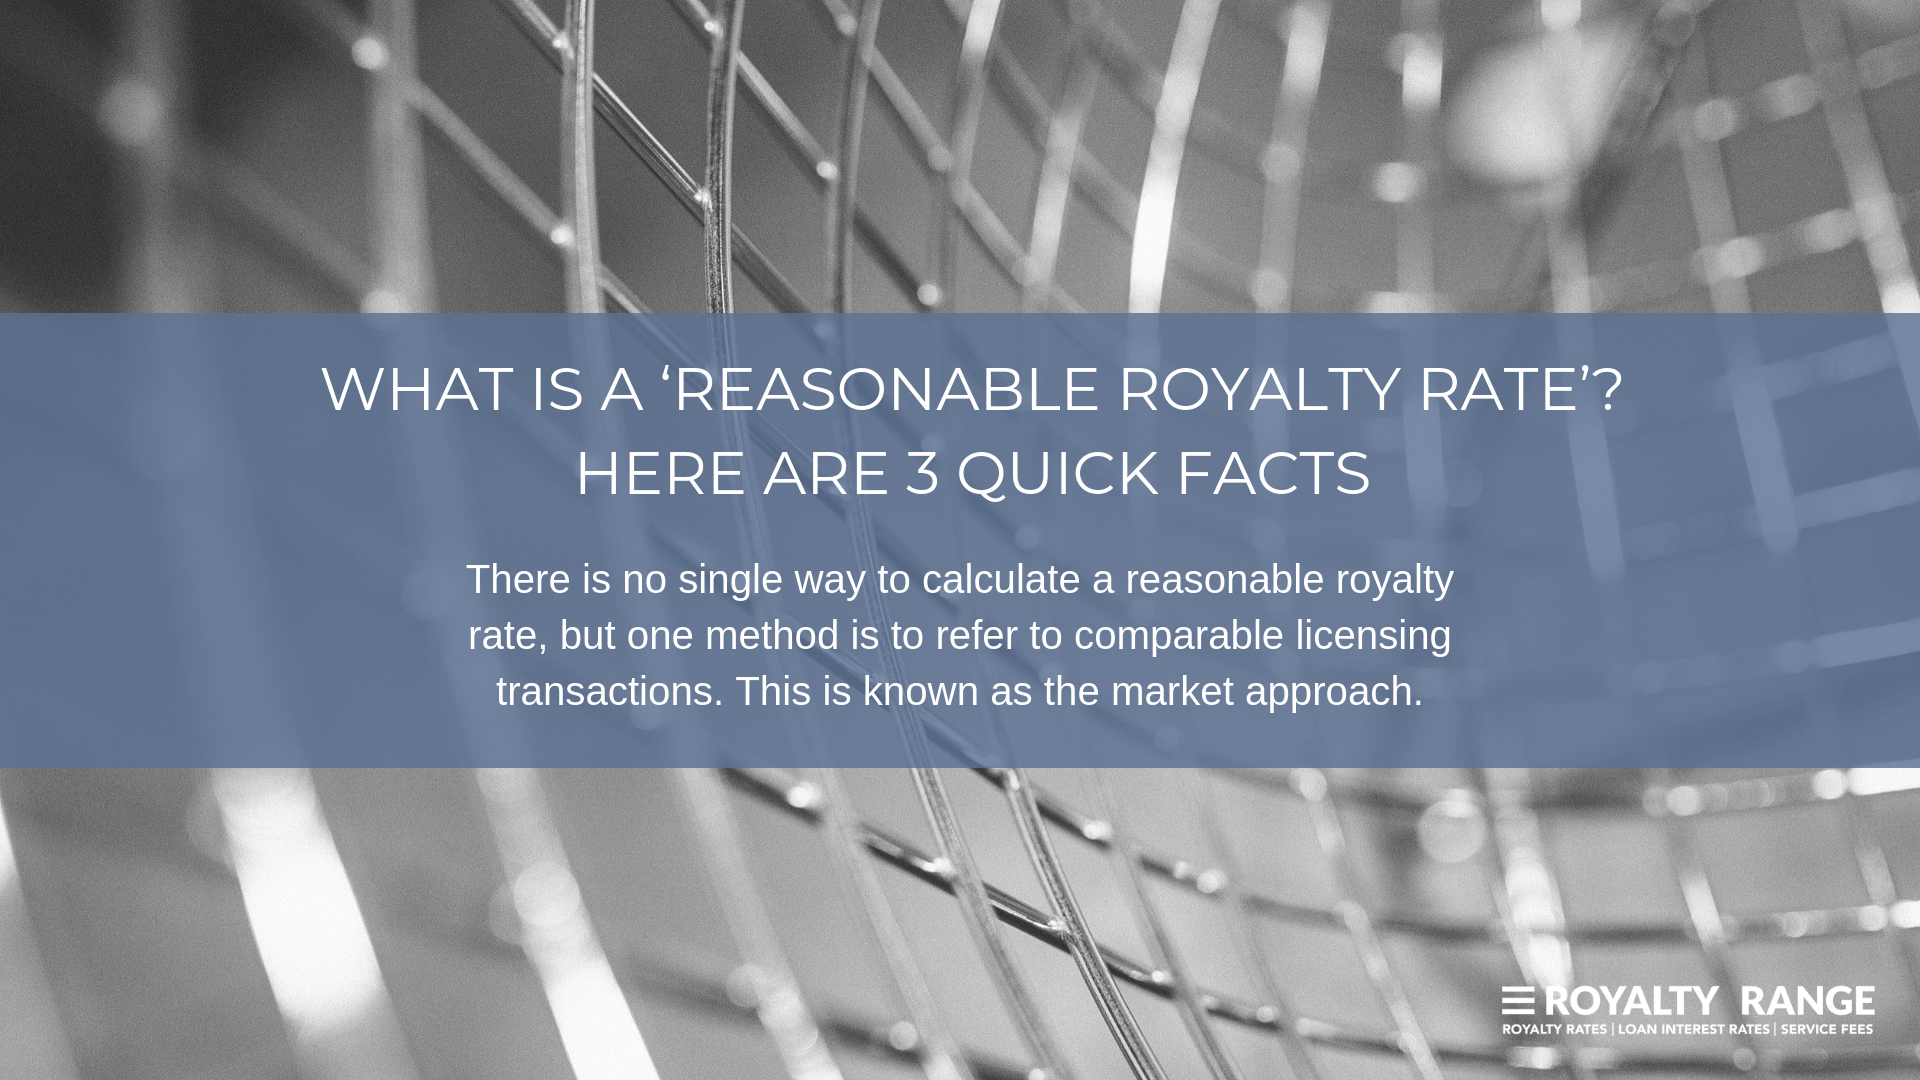 WHAT IS A ‘REASONABLE ROYALTY RATE’_ HERE ARE 3 QUICK FACTS